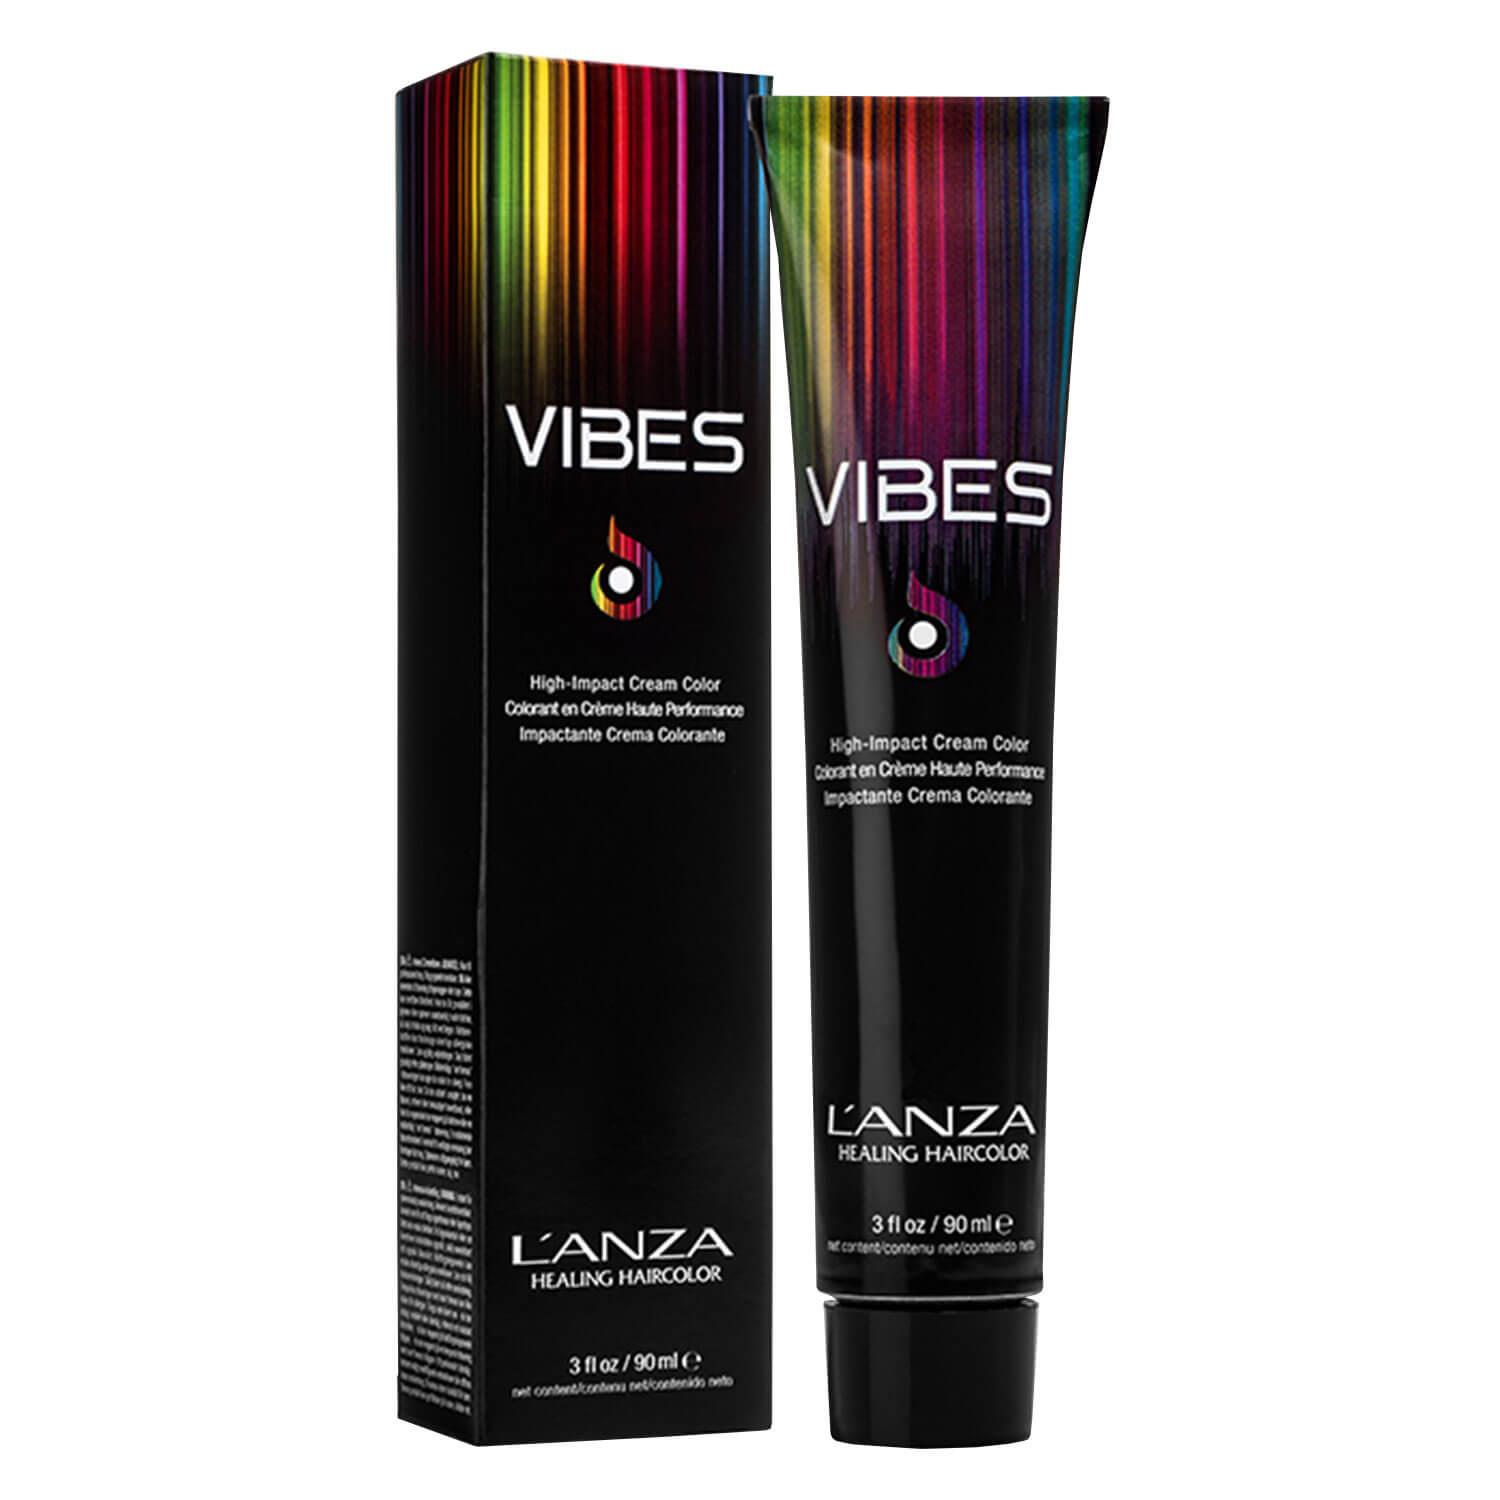 VIBES - High-Impact Cream Color Clear